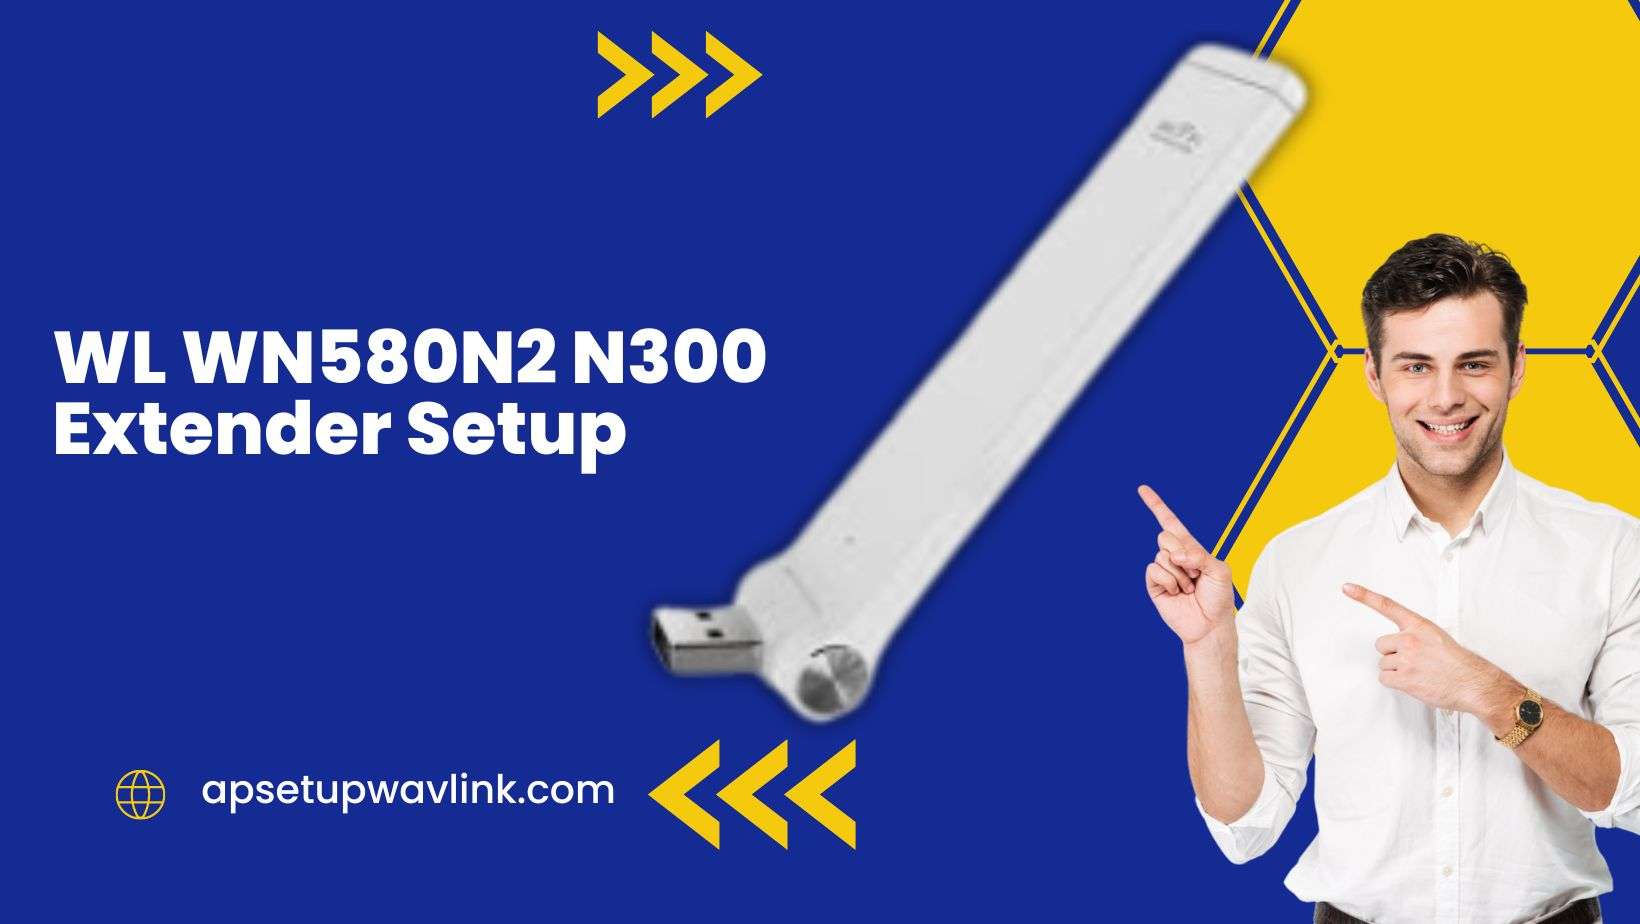 You are currently viewing WL WN580N2 N300 Extender Setup